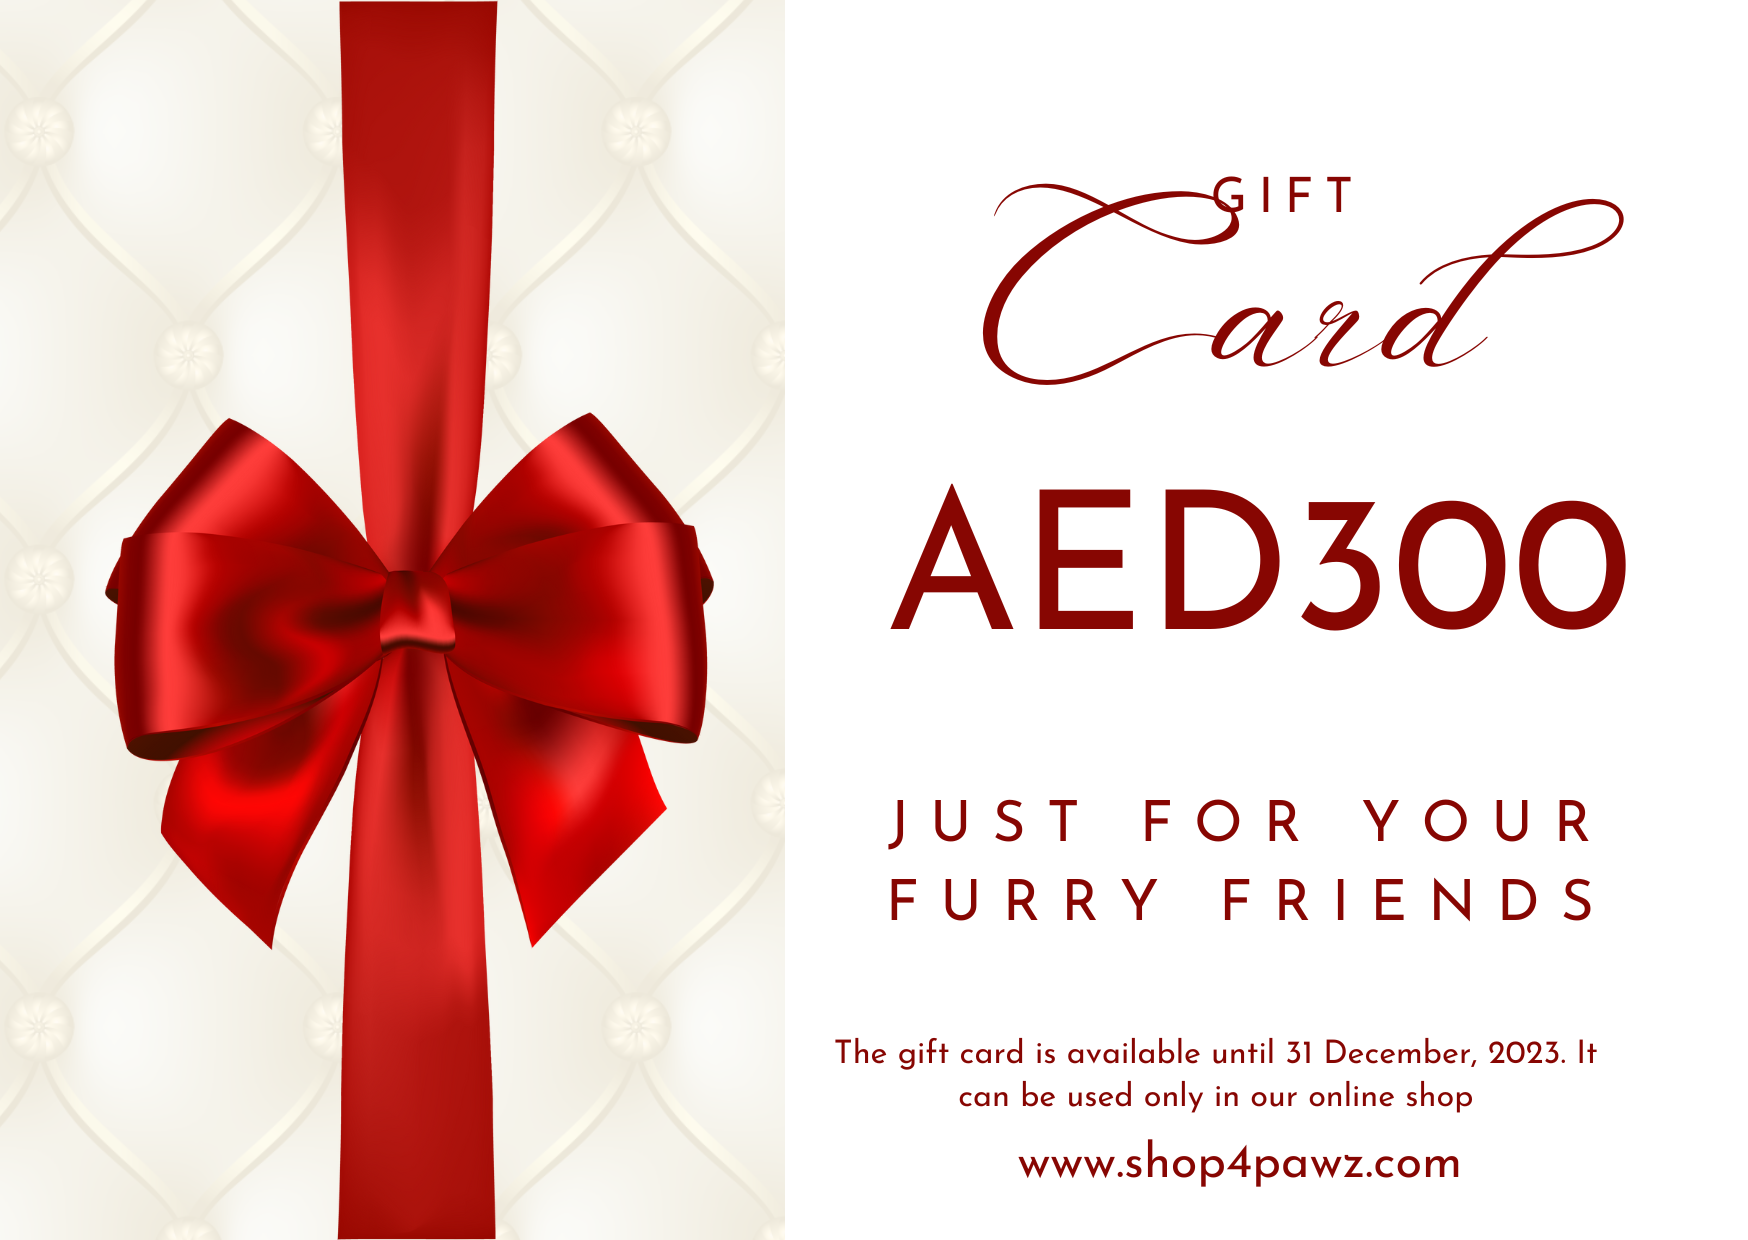 Pet lovers will be thrilled to receive a gift card they can use at our pet store.